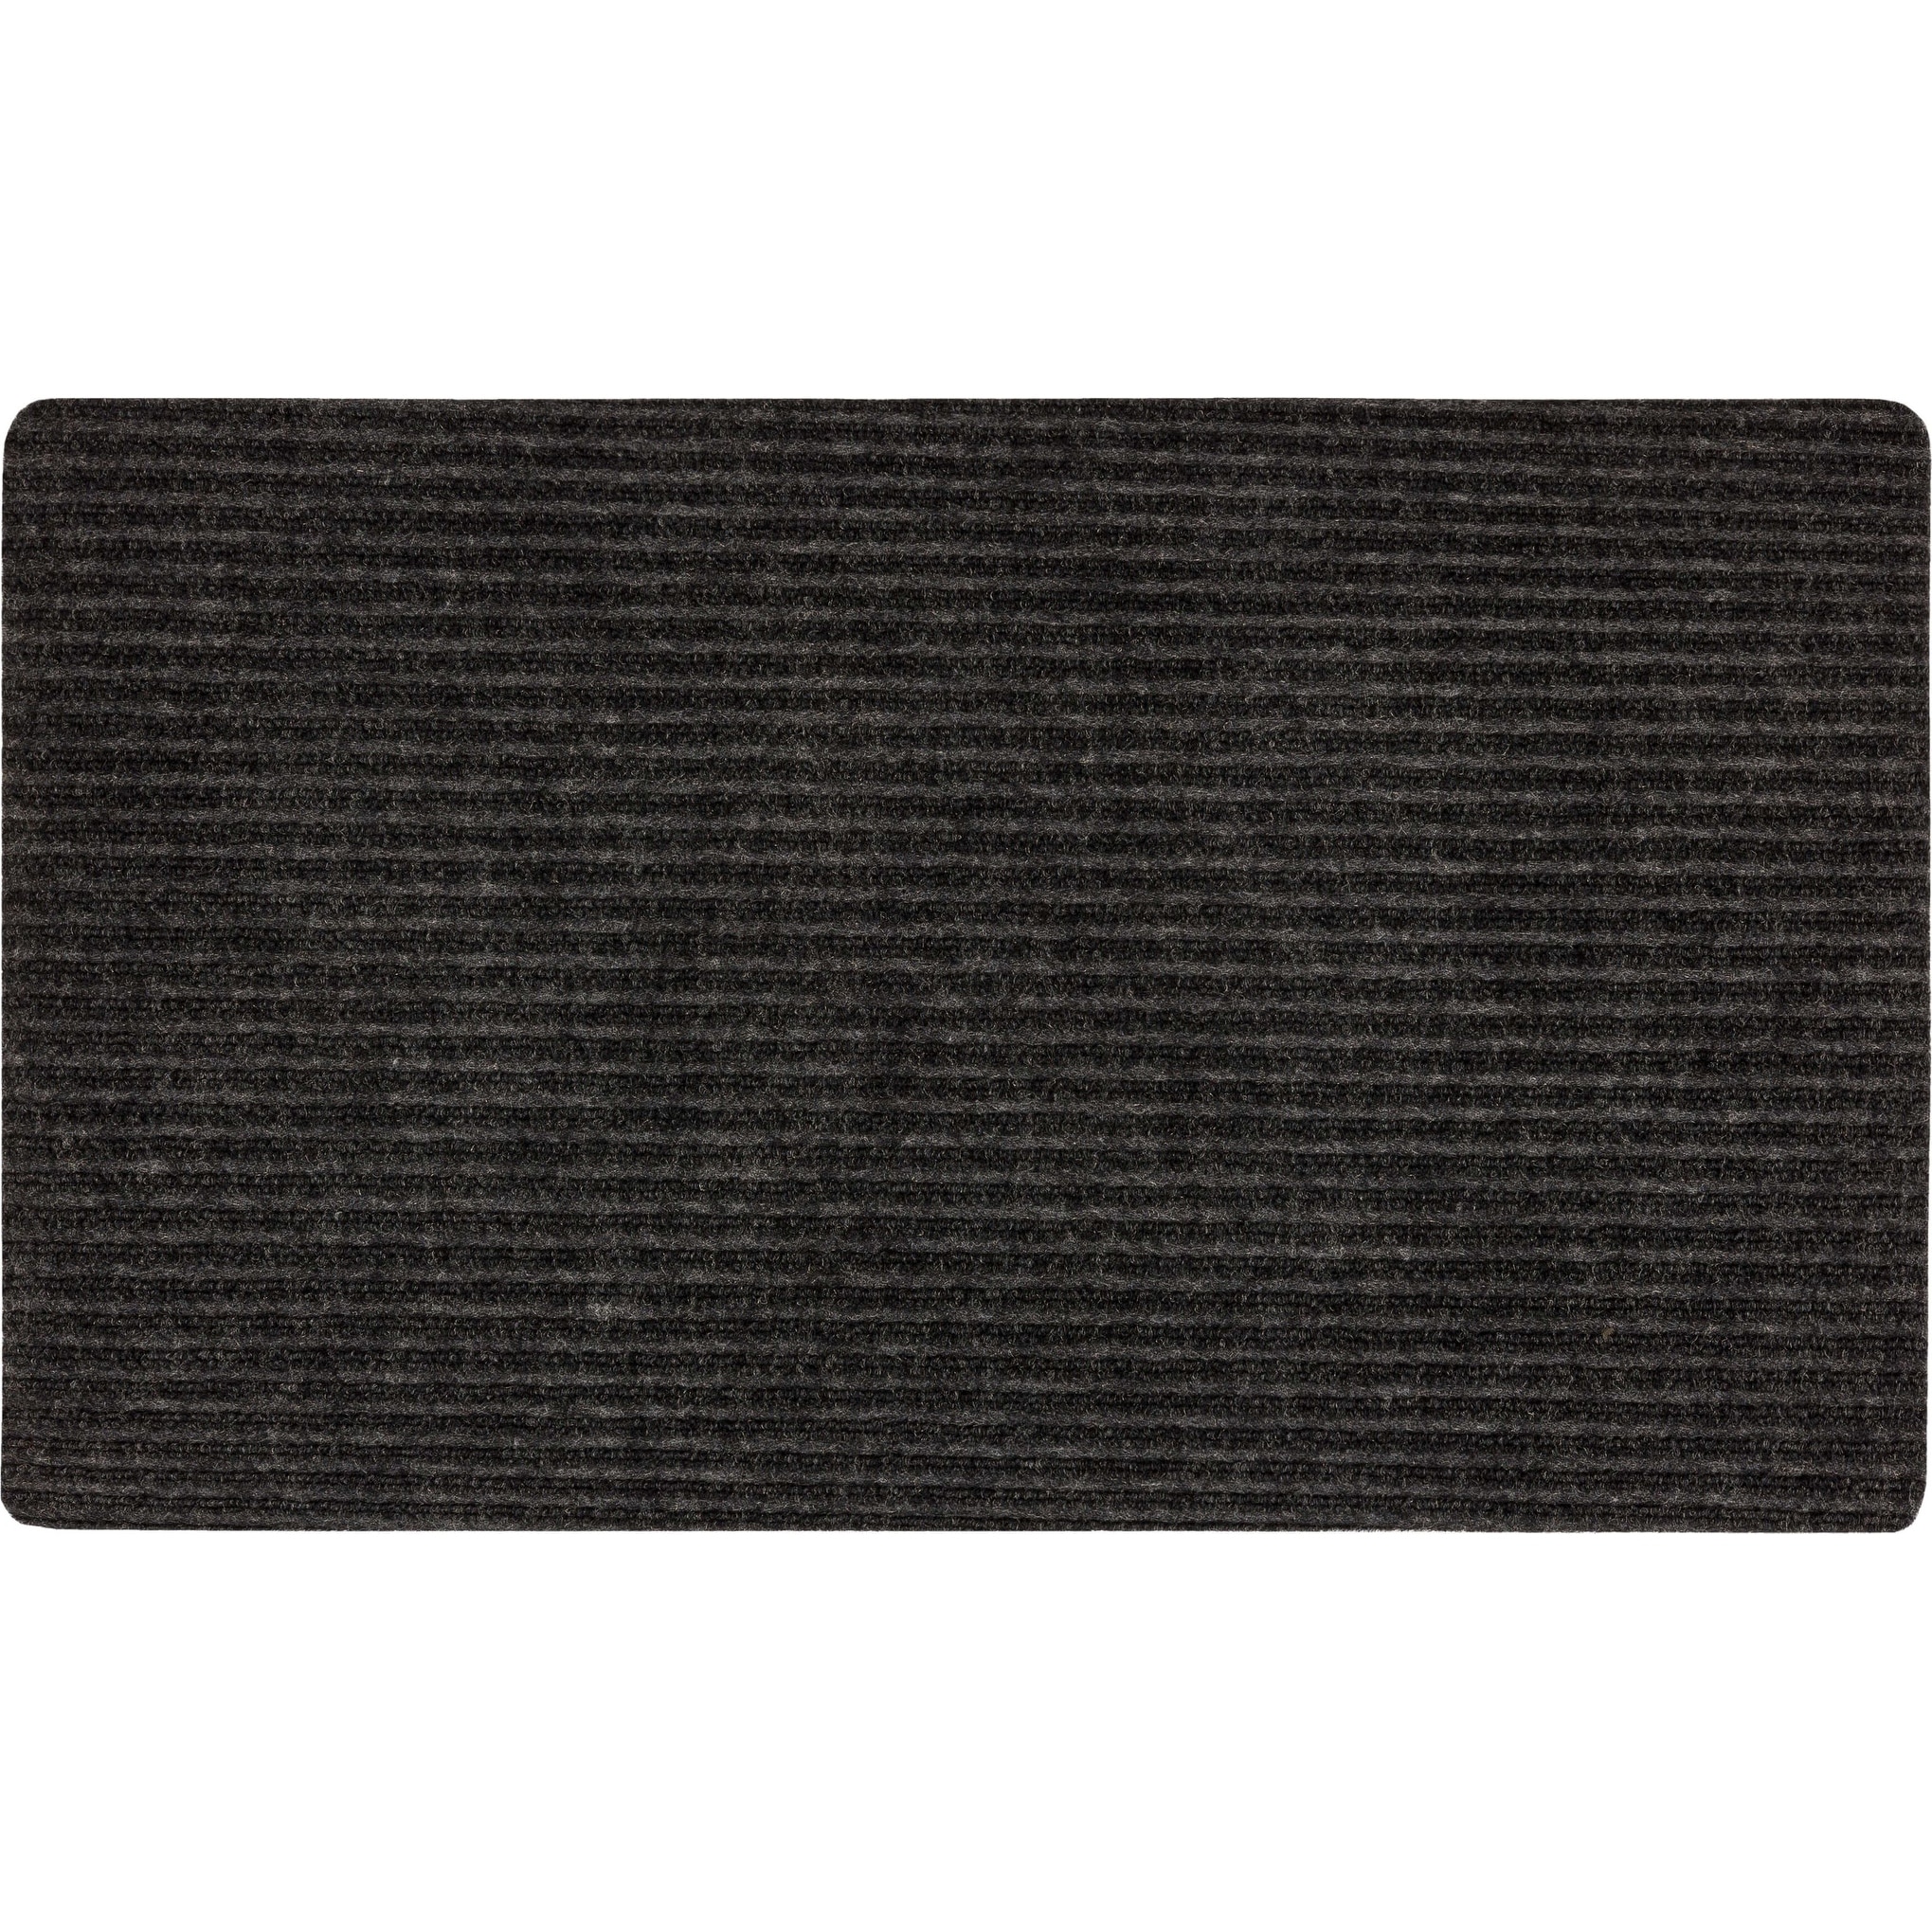 https://ak1.ostkcdn.com/images/products/is/images/direct/310434c4fbff0179e2396ae558b596a3459853cb/Mohawk-Home-Utility-Floor-Mat-for-Garage%2C-Entryway%2C-Porch%2C-and-Laundry-Room.jpg